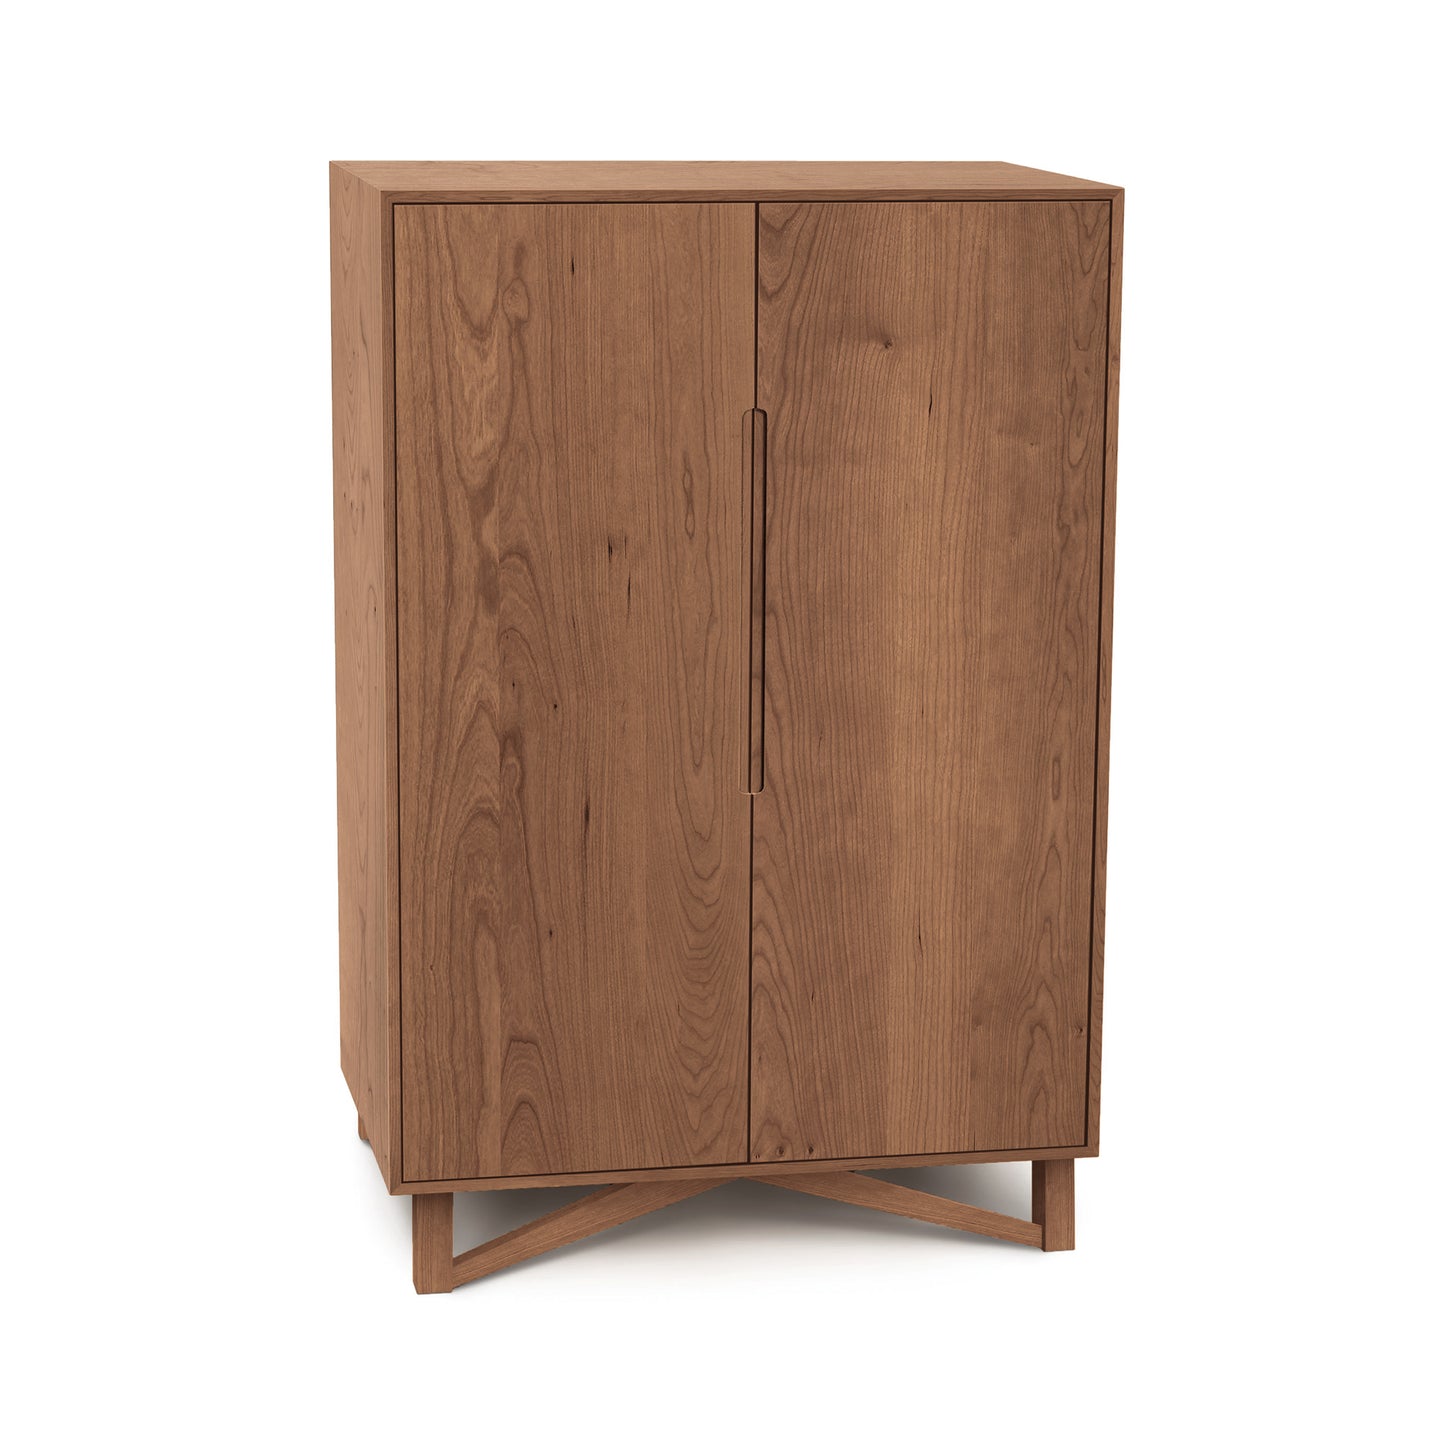 A solid hardwoods Copeland Furniture Exeter Bar Cabinet with two doors on a white background.